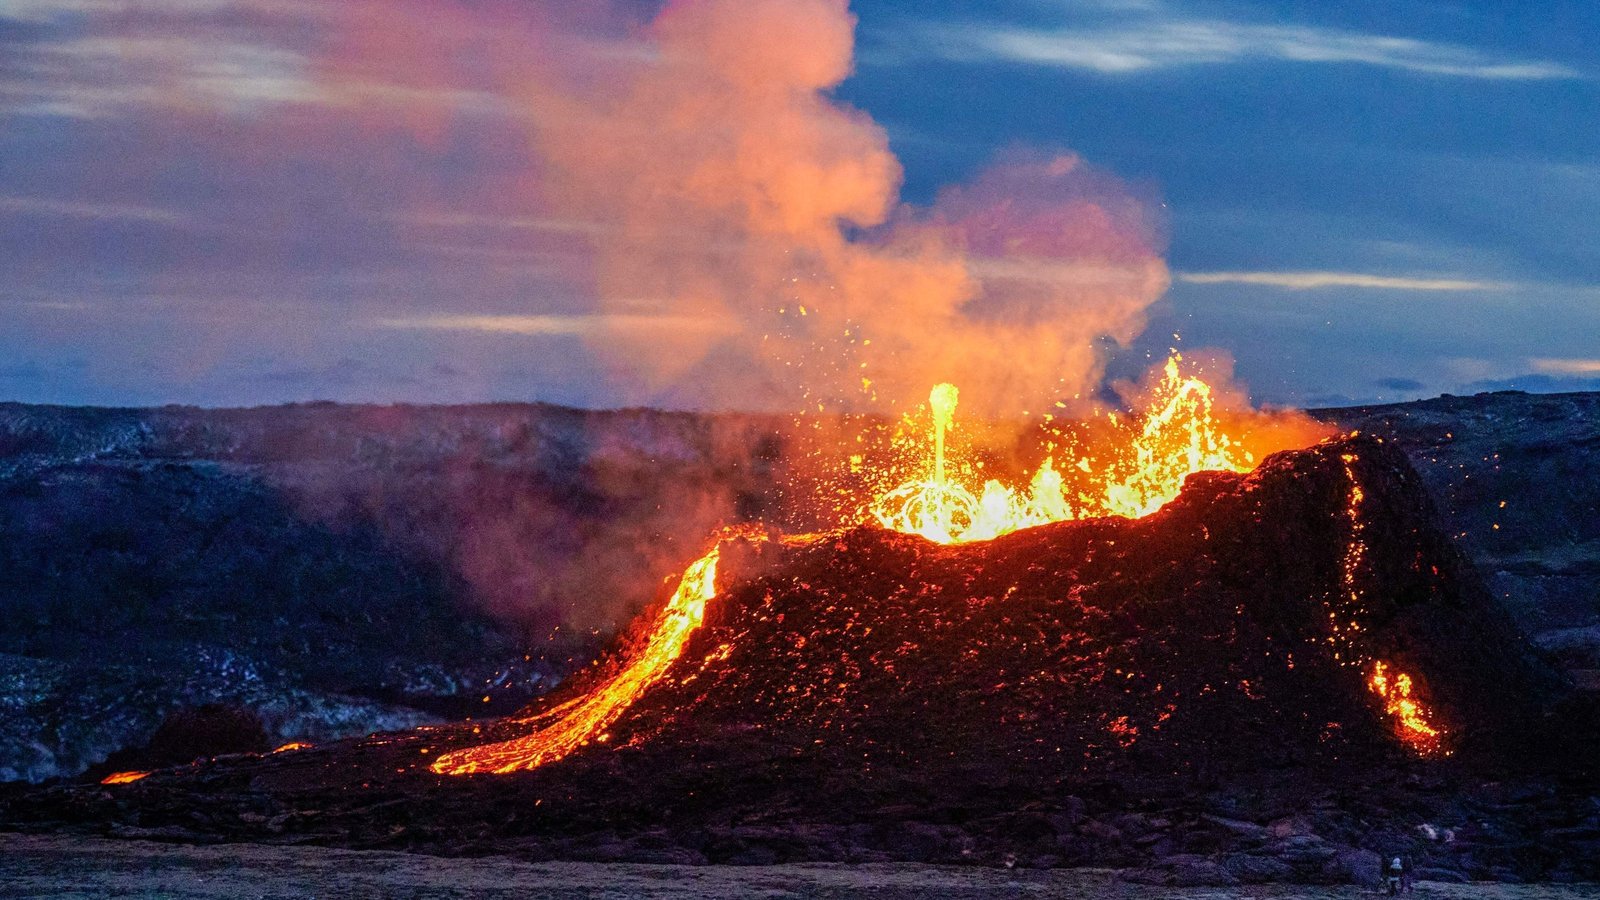 Icelandic volcano roars back to life after 6,000 years